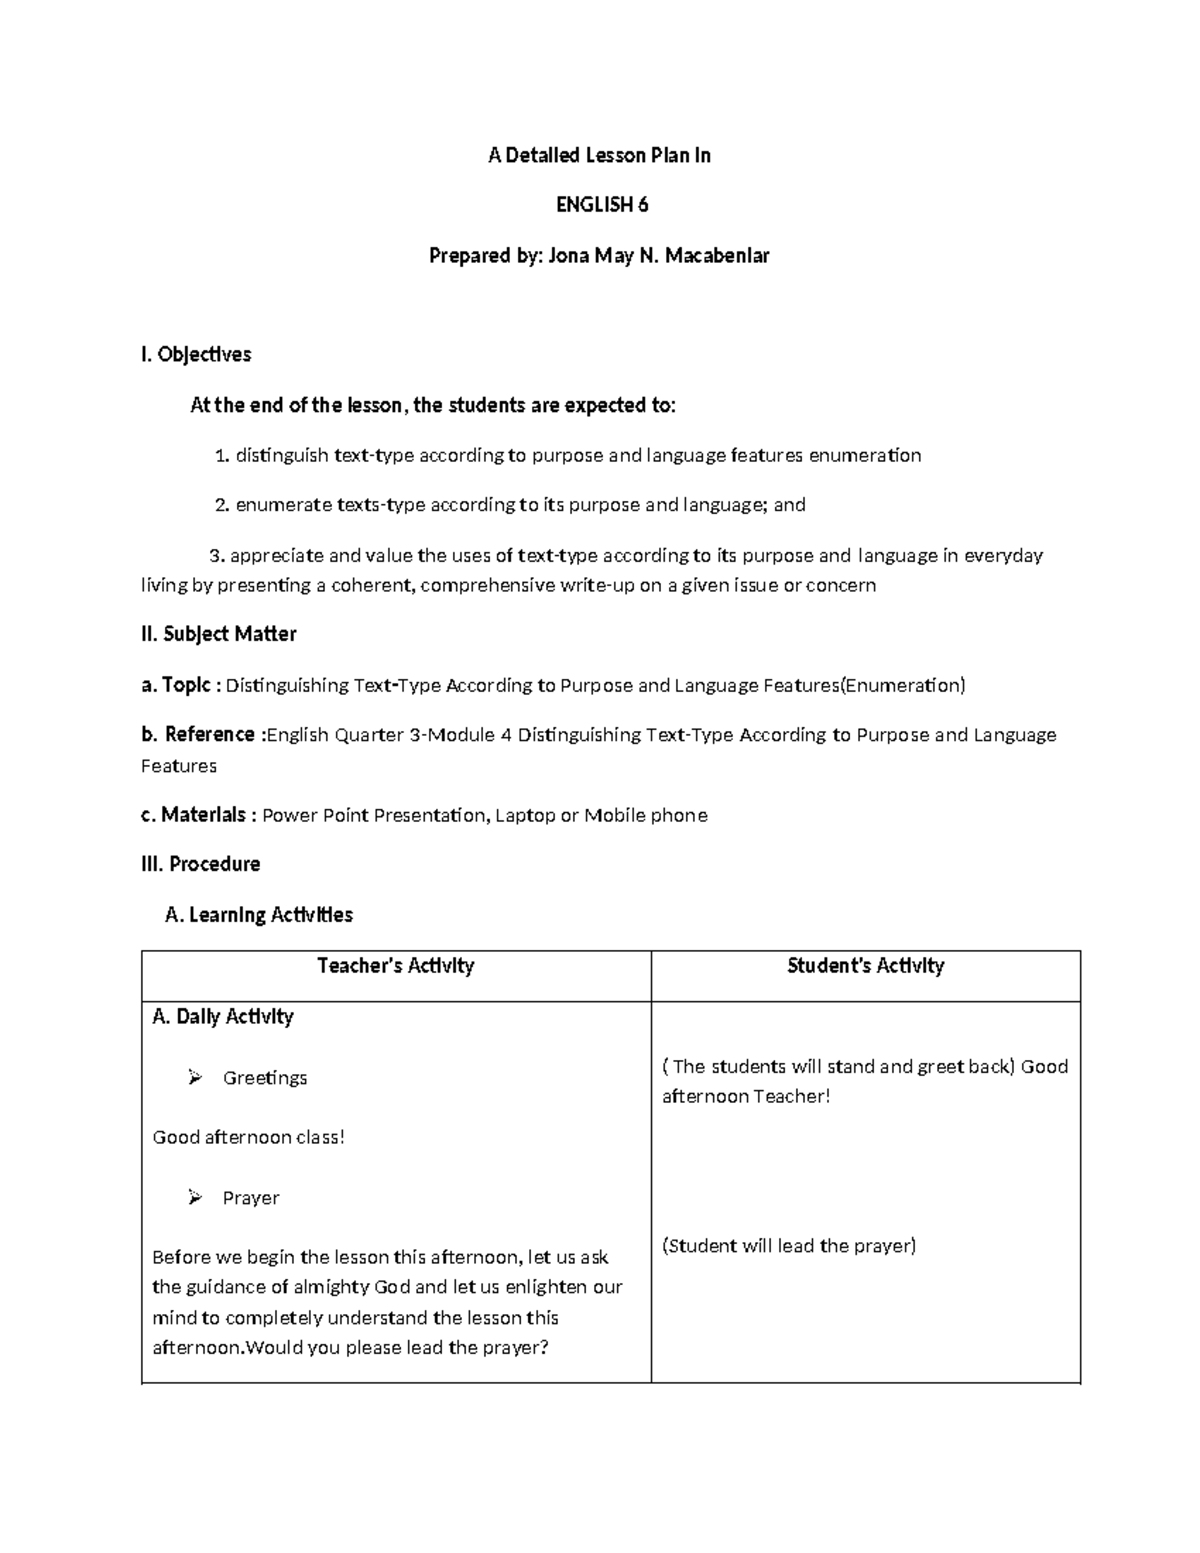 Lessonplan English 6 Final - A Detailed Lesson Plan in ENGLISH 6 ...